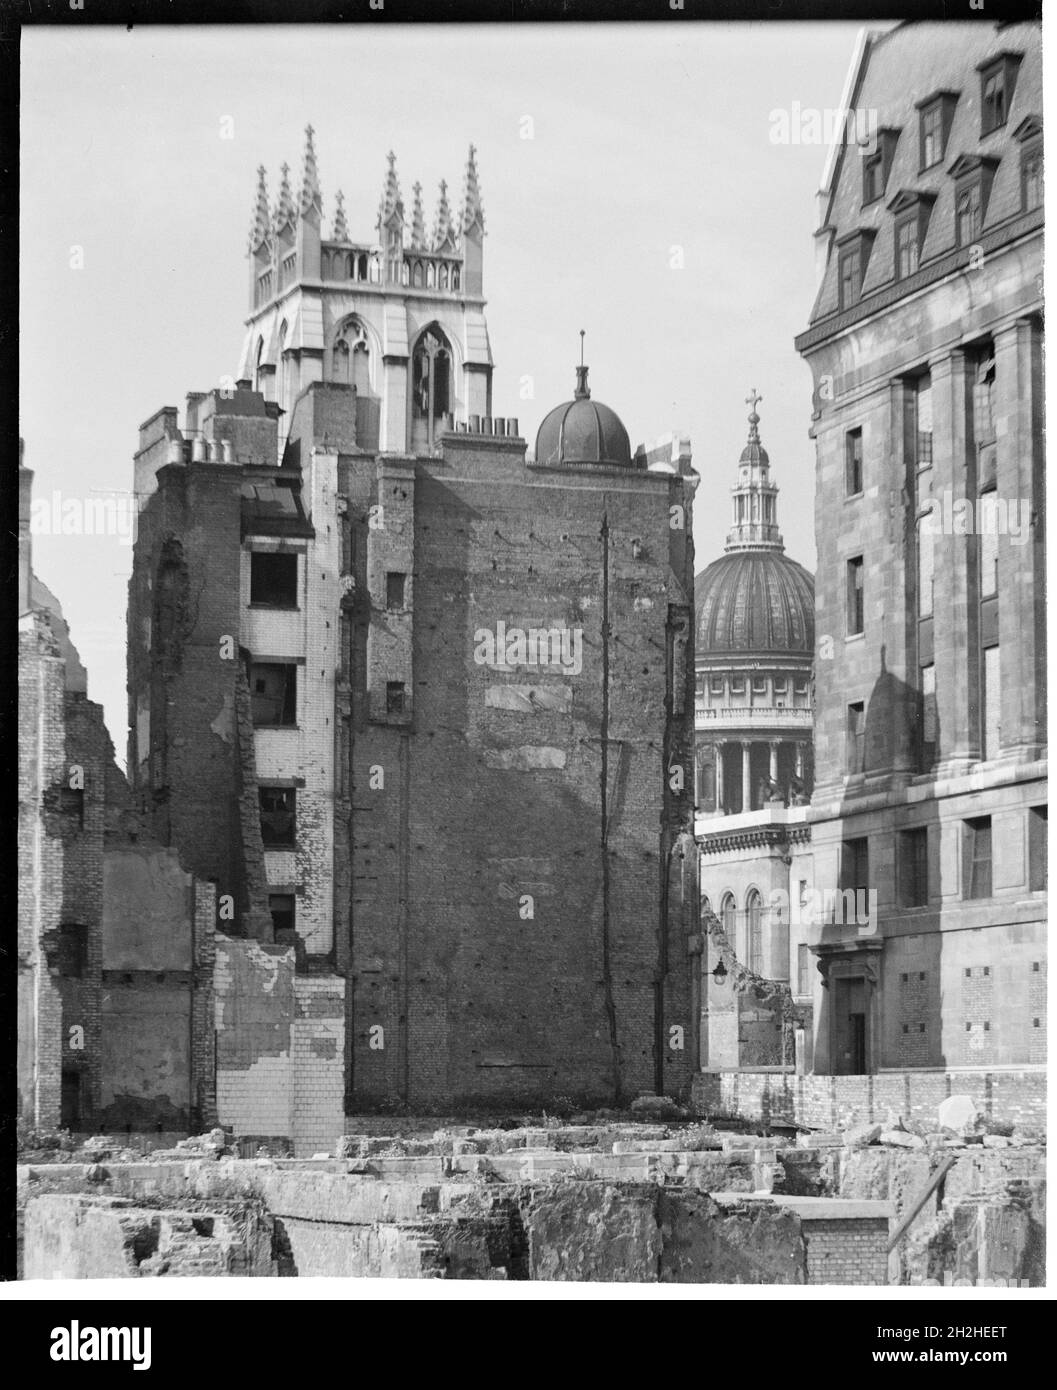 St Paul's Cathedral, St Paul's Churchyard, City of London, City and County of the City of London, Greater London Authority, 1941-1945. A view from the north-east showing the dome of St Paul's Cathedral through a gap between buildings, with the top of the tower of St Alban's Church on Wood Street behind a bomb damaged building in the foreground. St Alban's Church was rebuilt by Christopher Wren after the Great Fire of London in 1666. During the Second World War it was destroyed by bombing with only the tower surviving. Stock Photo